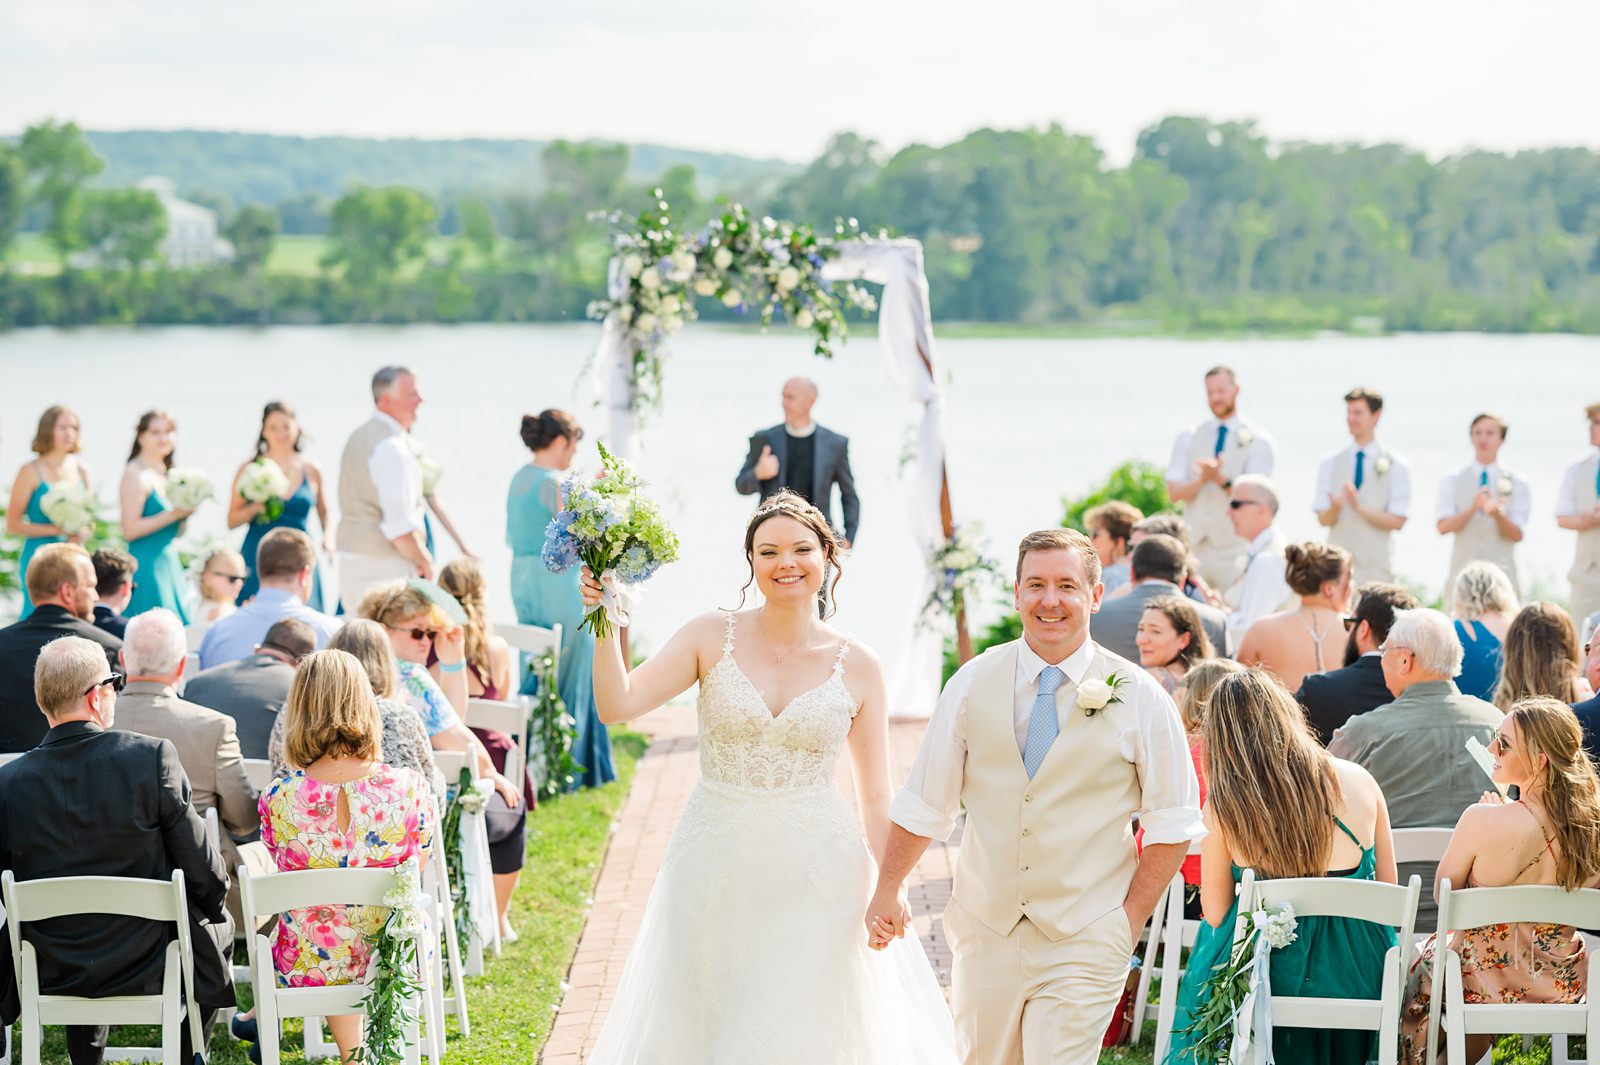 Ceremony overlooking river at Summer Belle Grove Wedding by Richmond Wedding Photographer